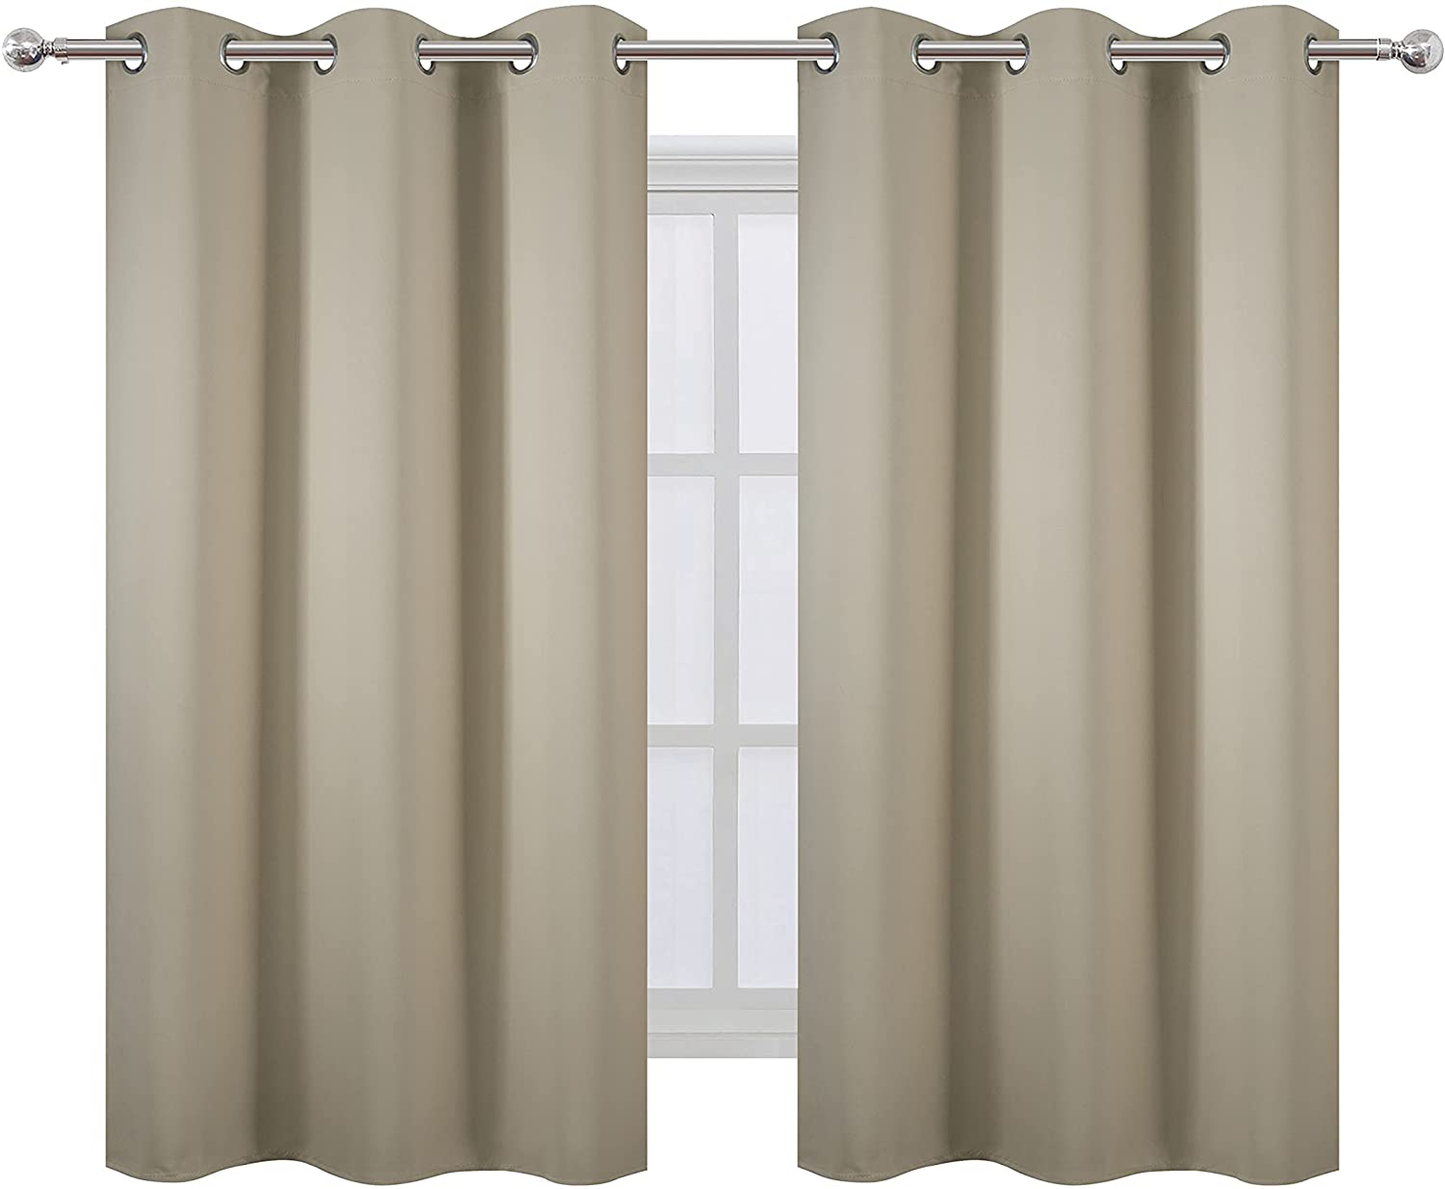 LEMOMO Sea Teal Thermal Blackout Curtains/38 x 63 Inch/Set of 2 Panels Room Darkening Curtains for Bedroom